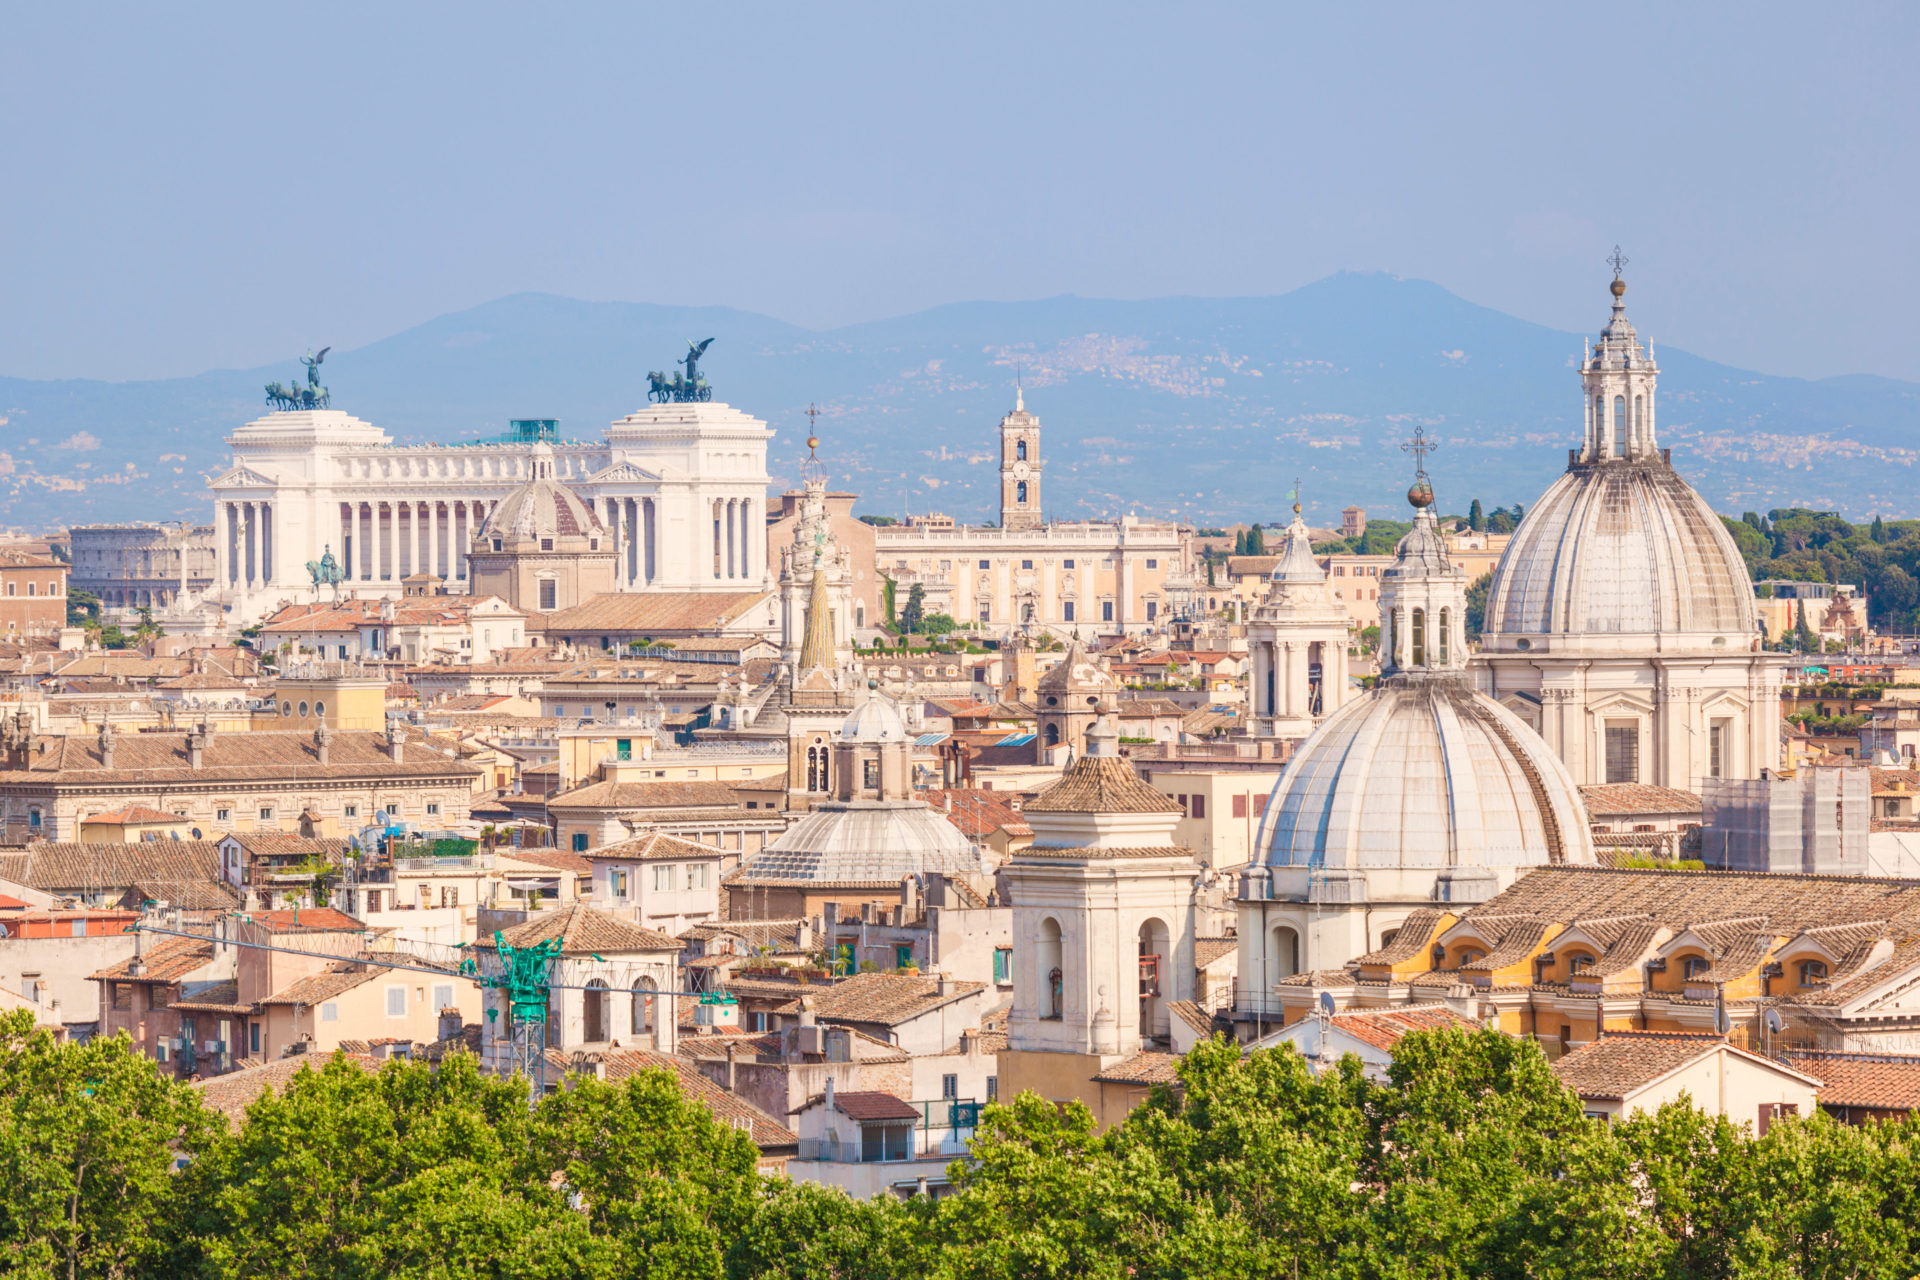 Churches and domes of the Rome skyline in Italy in July 2015.